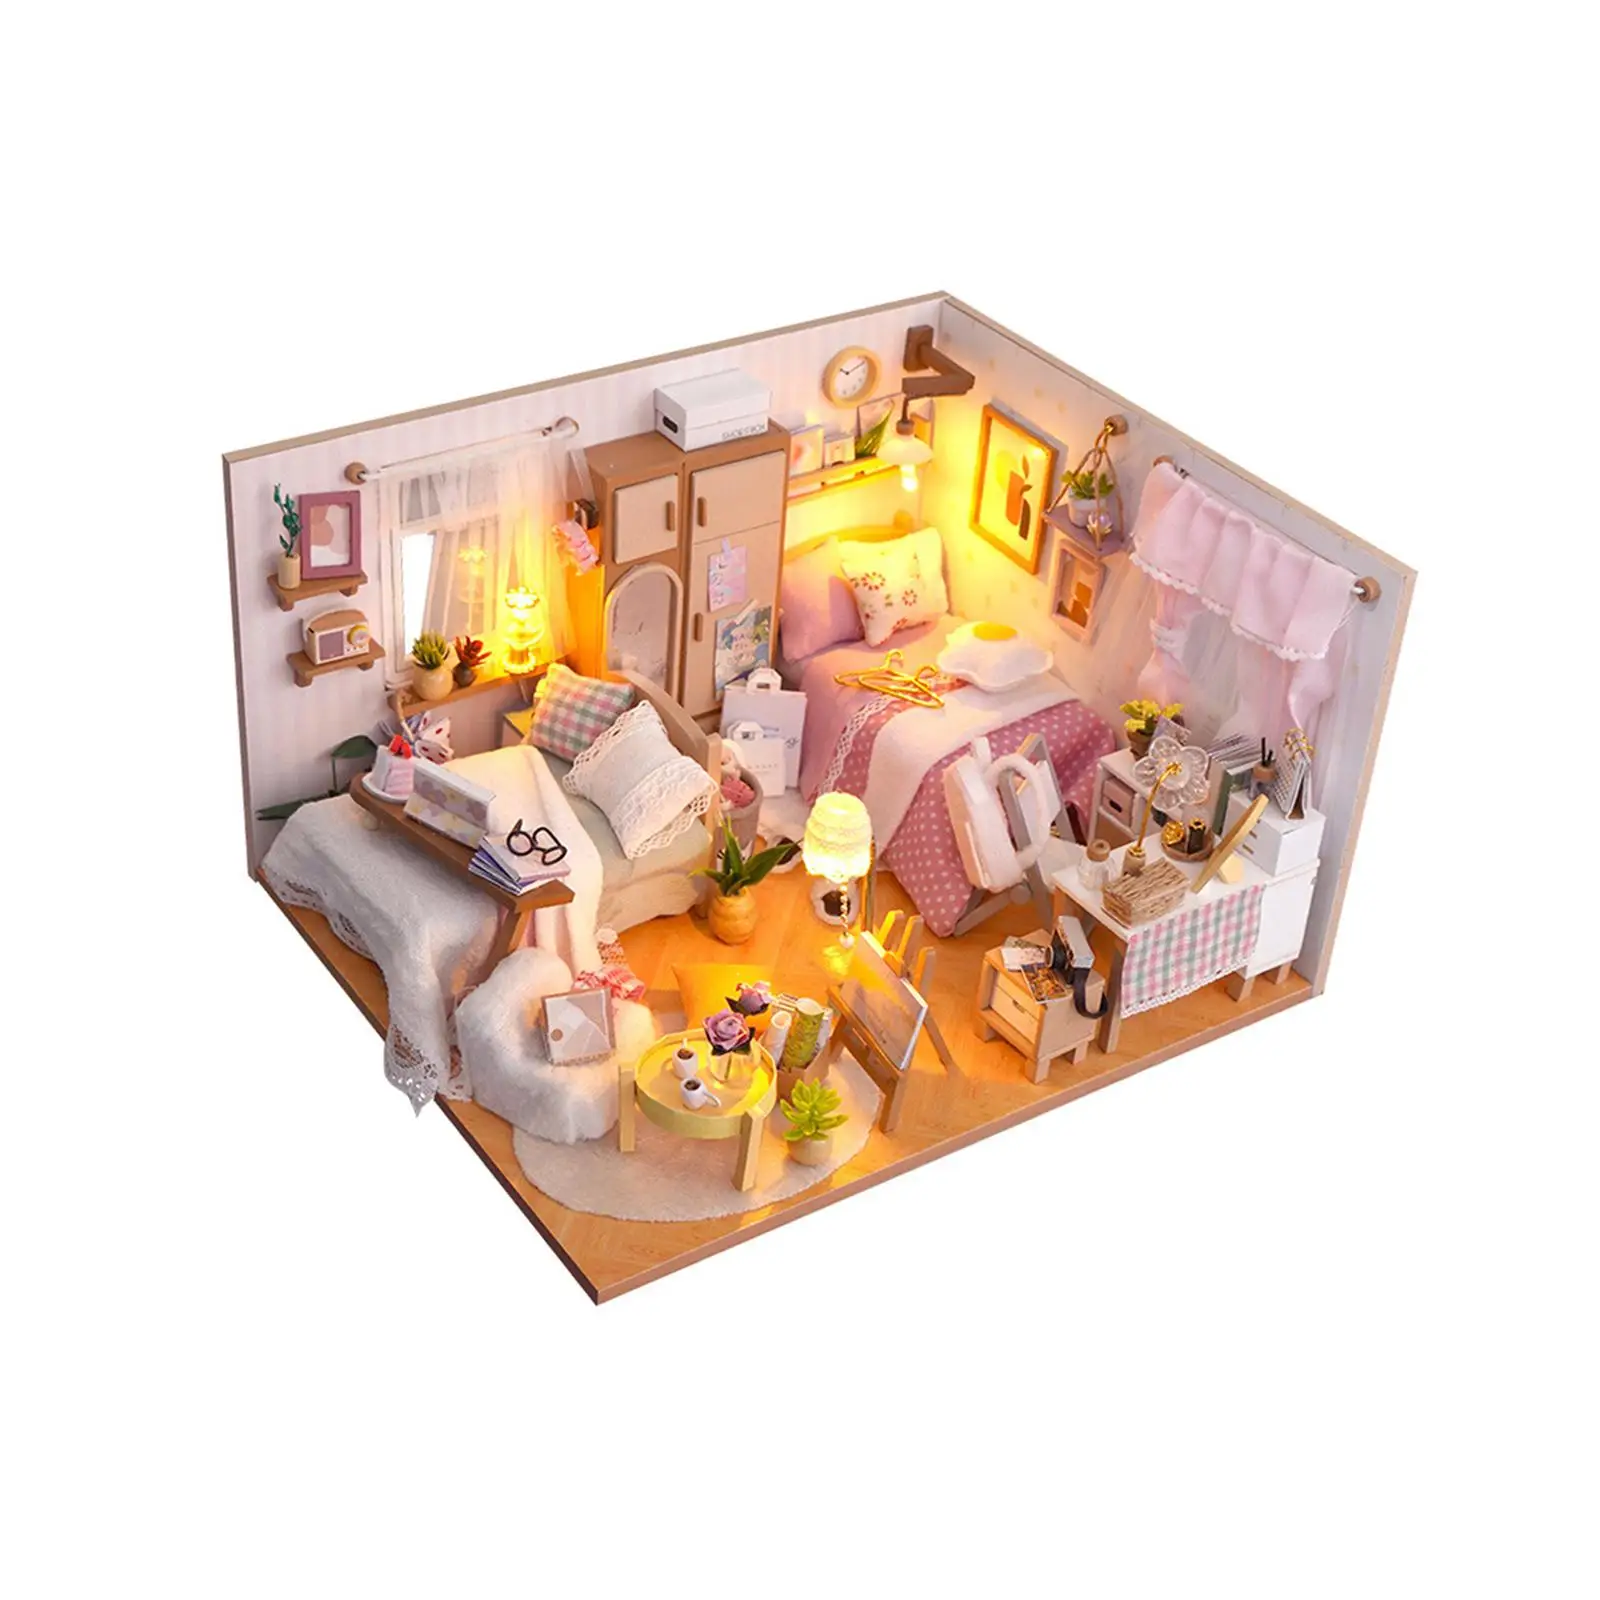 Wooden Miniature Dollhouse Kits Doll House Model for Boys Girls with Furniture